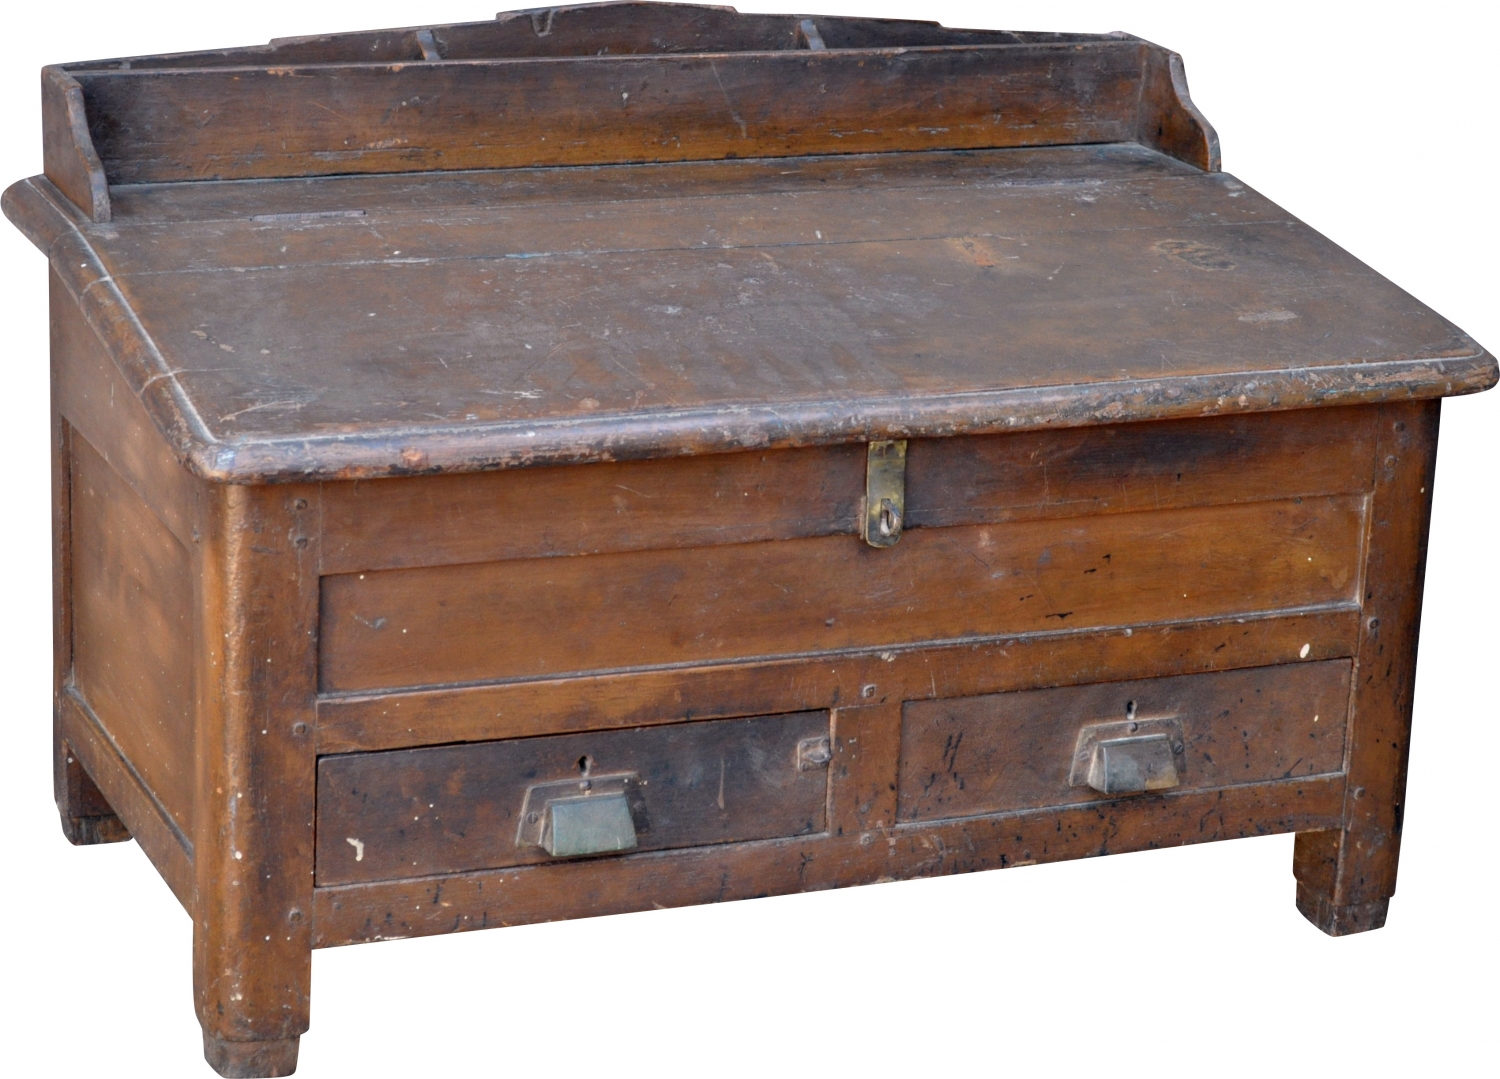 Floor Writing Desk Small Writing Desk With Many Compartments